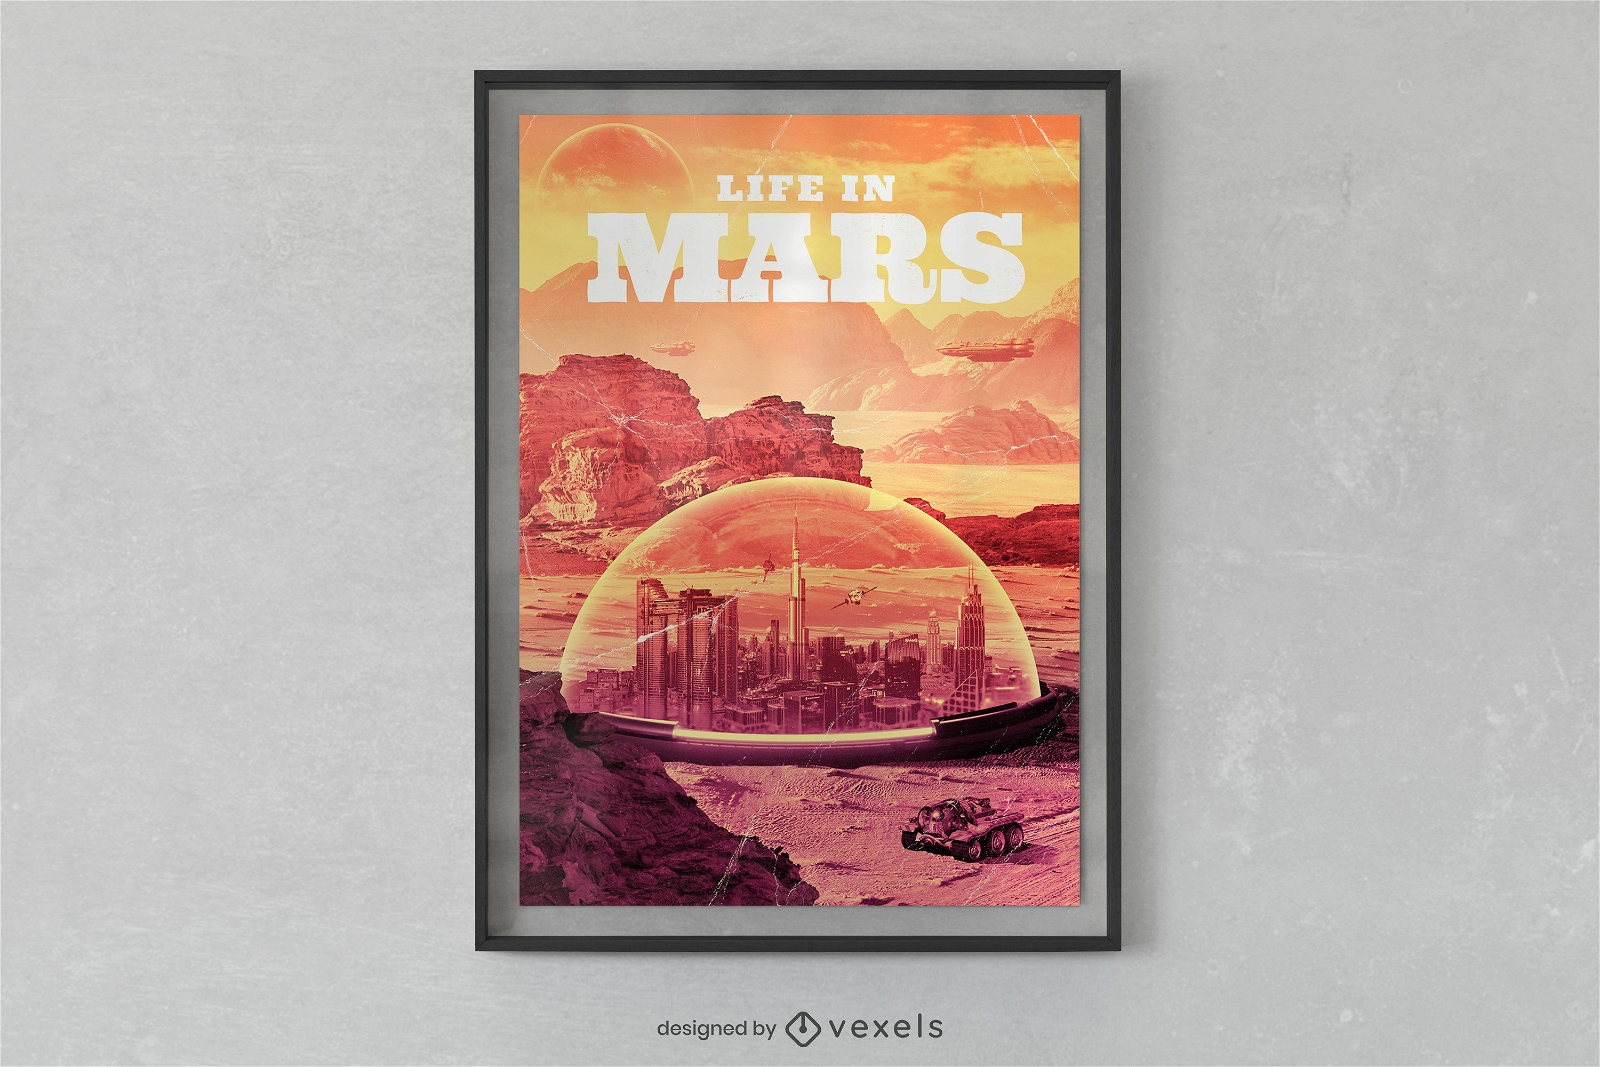 Dome life in Mars poster design